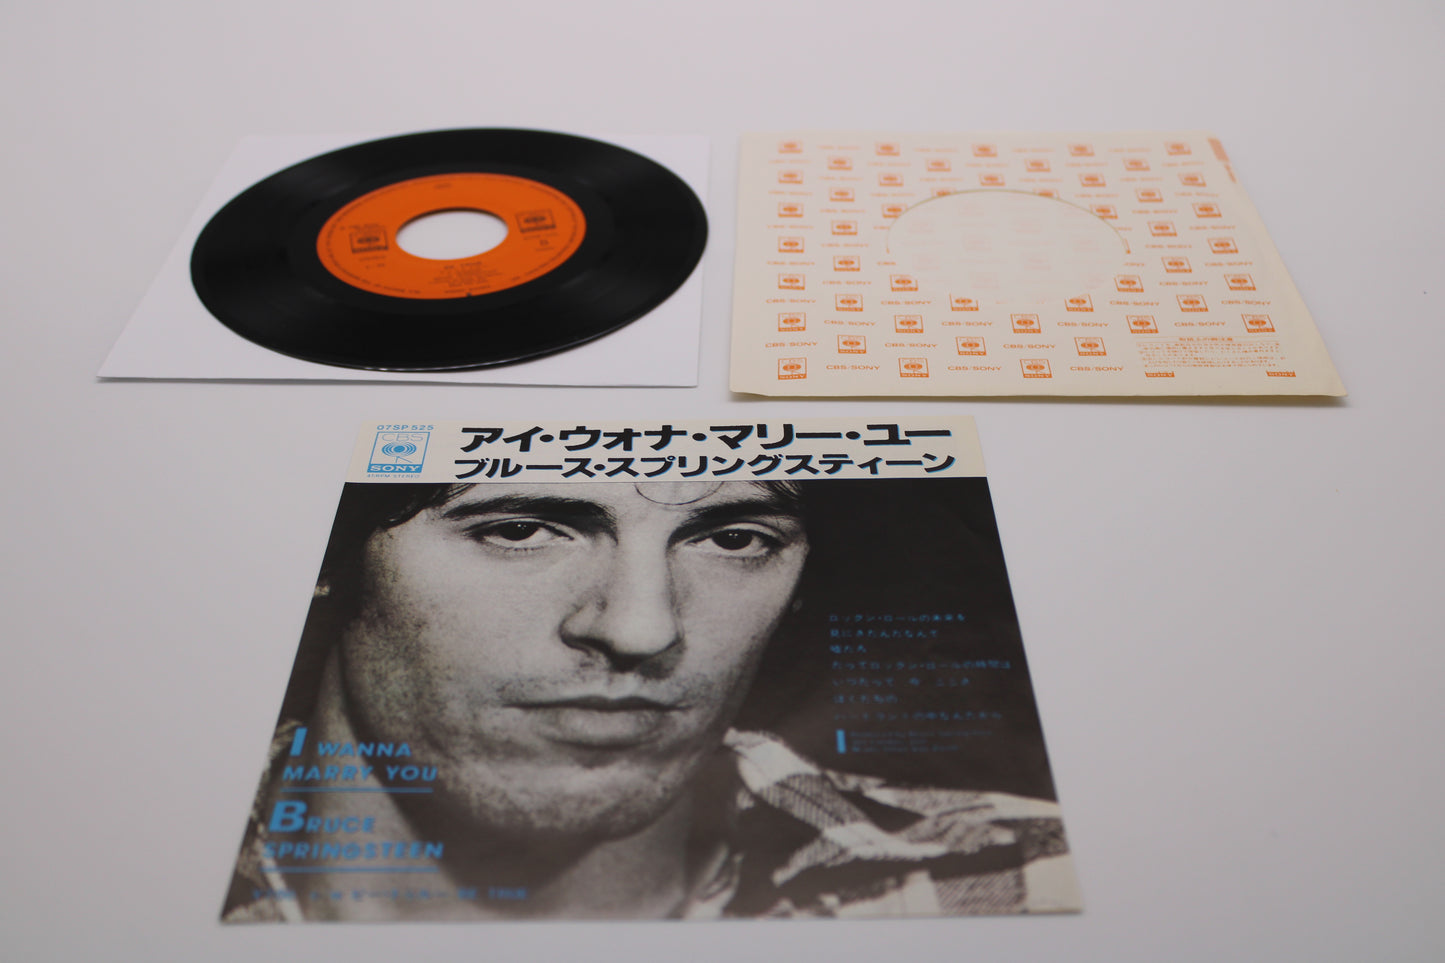 Bruce Springsteen 45 record - I Wanna Marry You - Japan release 1981